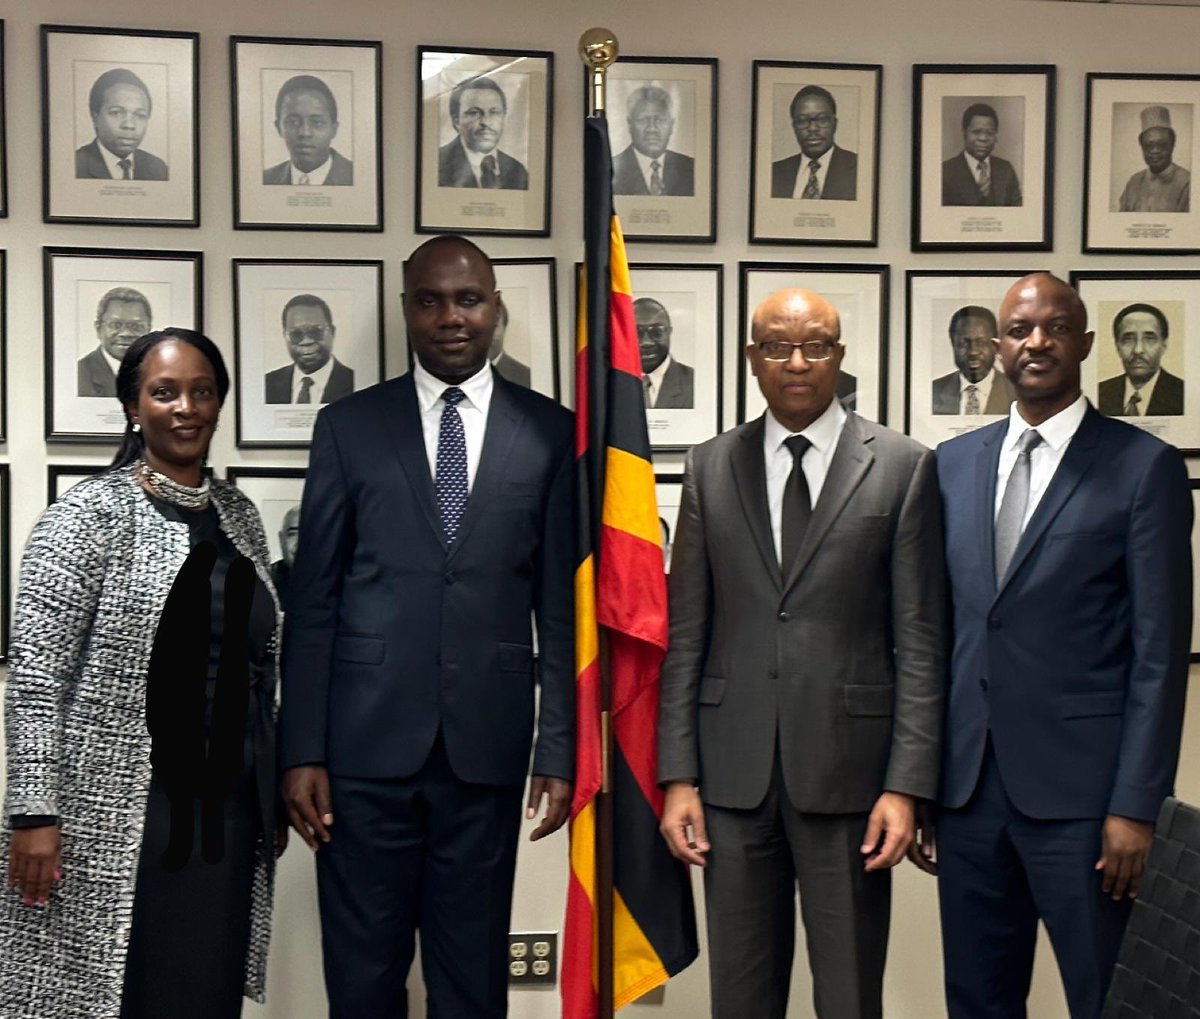 The @IMFNews-@World Bank Spring Meetings commenced this morning in D.C. where I met with the Africa Group 1 ED, @Dr_Ngaruko, @MoFPED's Hon. Min. Musasizi, PS/ST Ggoobi, @BOU_Official officials & other members of Uganda's delegation. @henrymusasizi1 @rggoobi @UgandaMFA